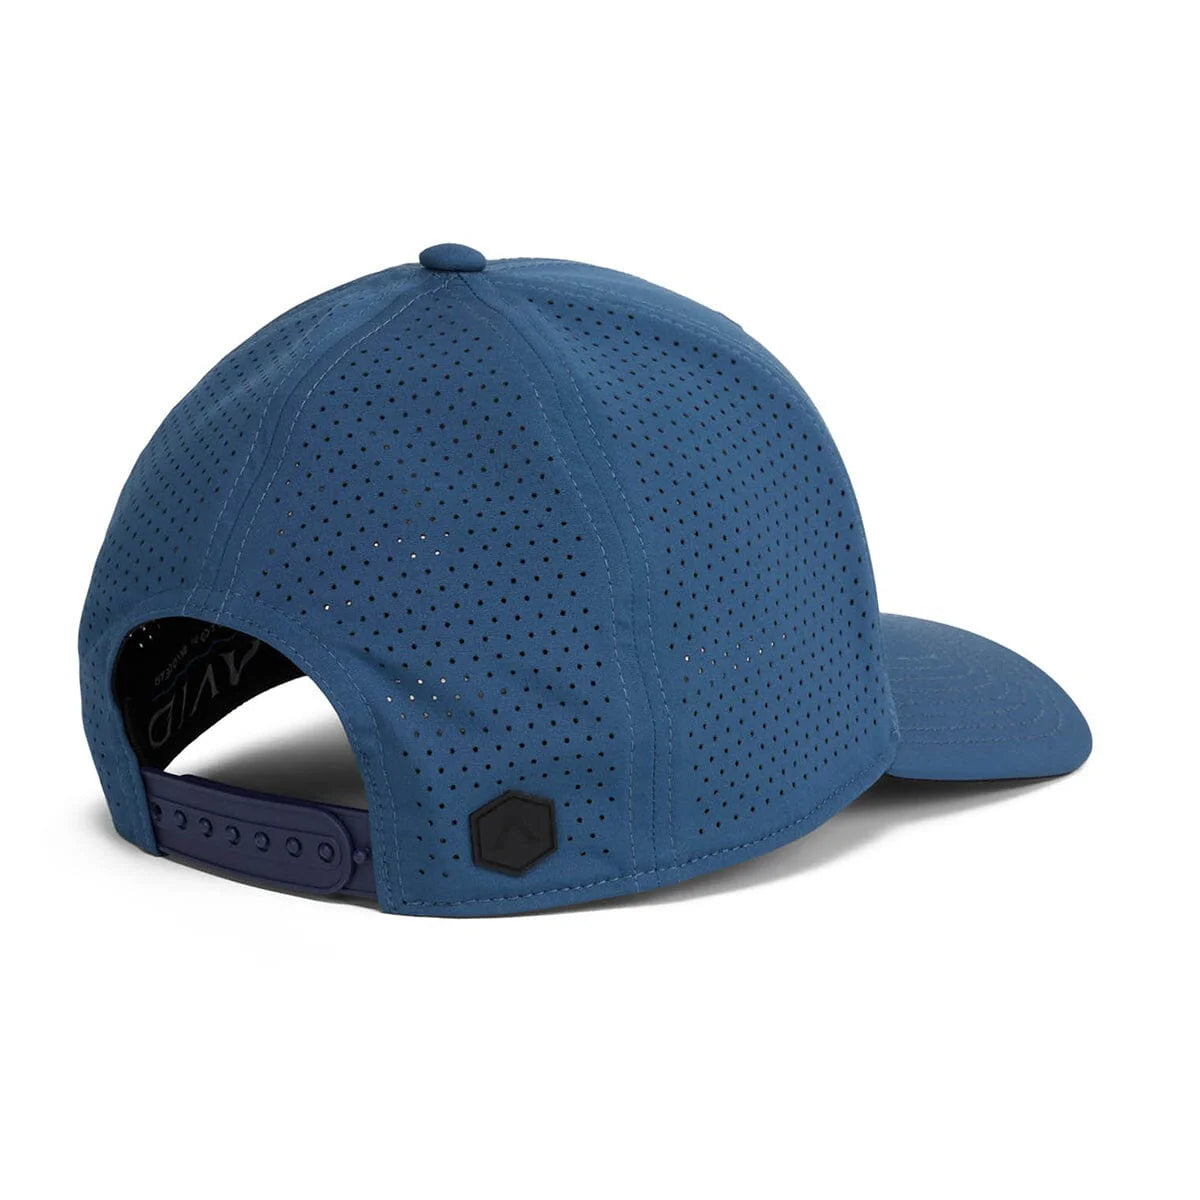 APEX PERFORMANCE HAT ABYSS